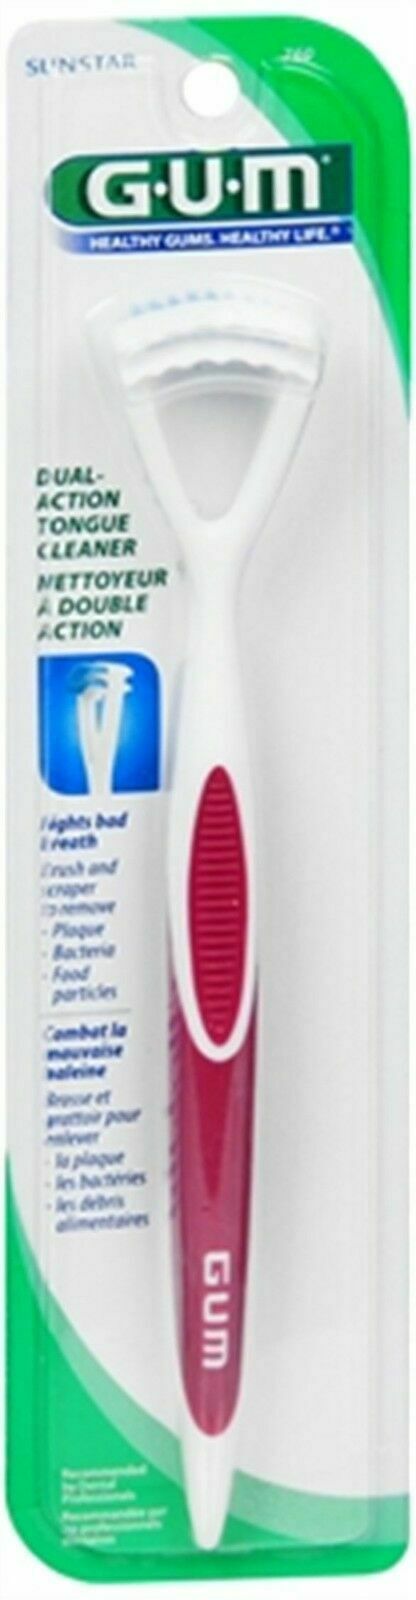 Genuine Gum Dual-action Tongue Cleaner 1 Each (pack Of 2)